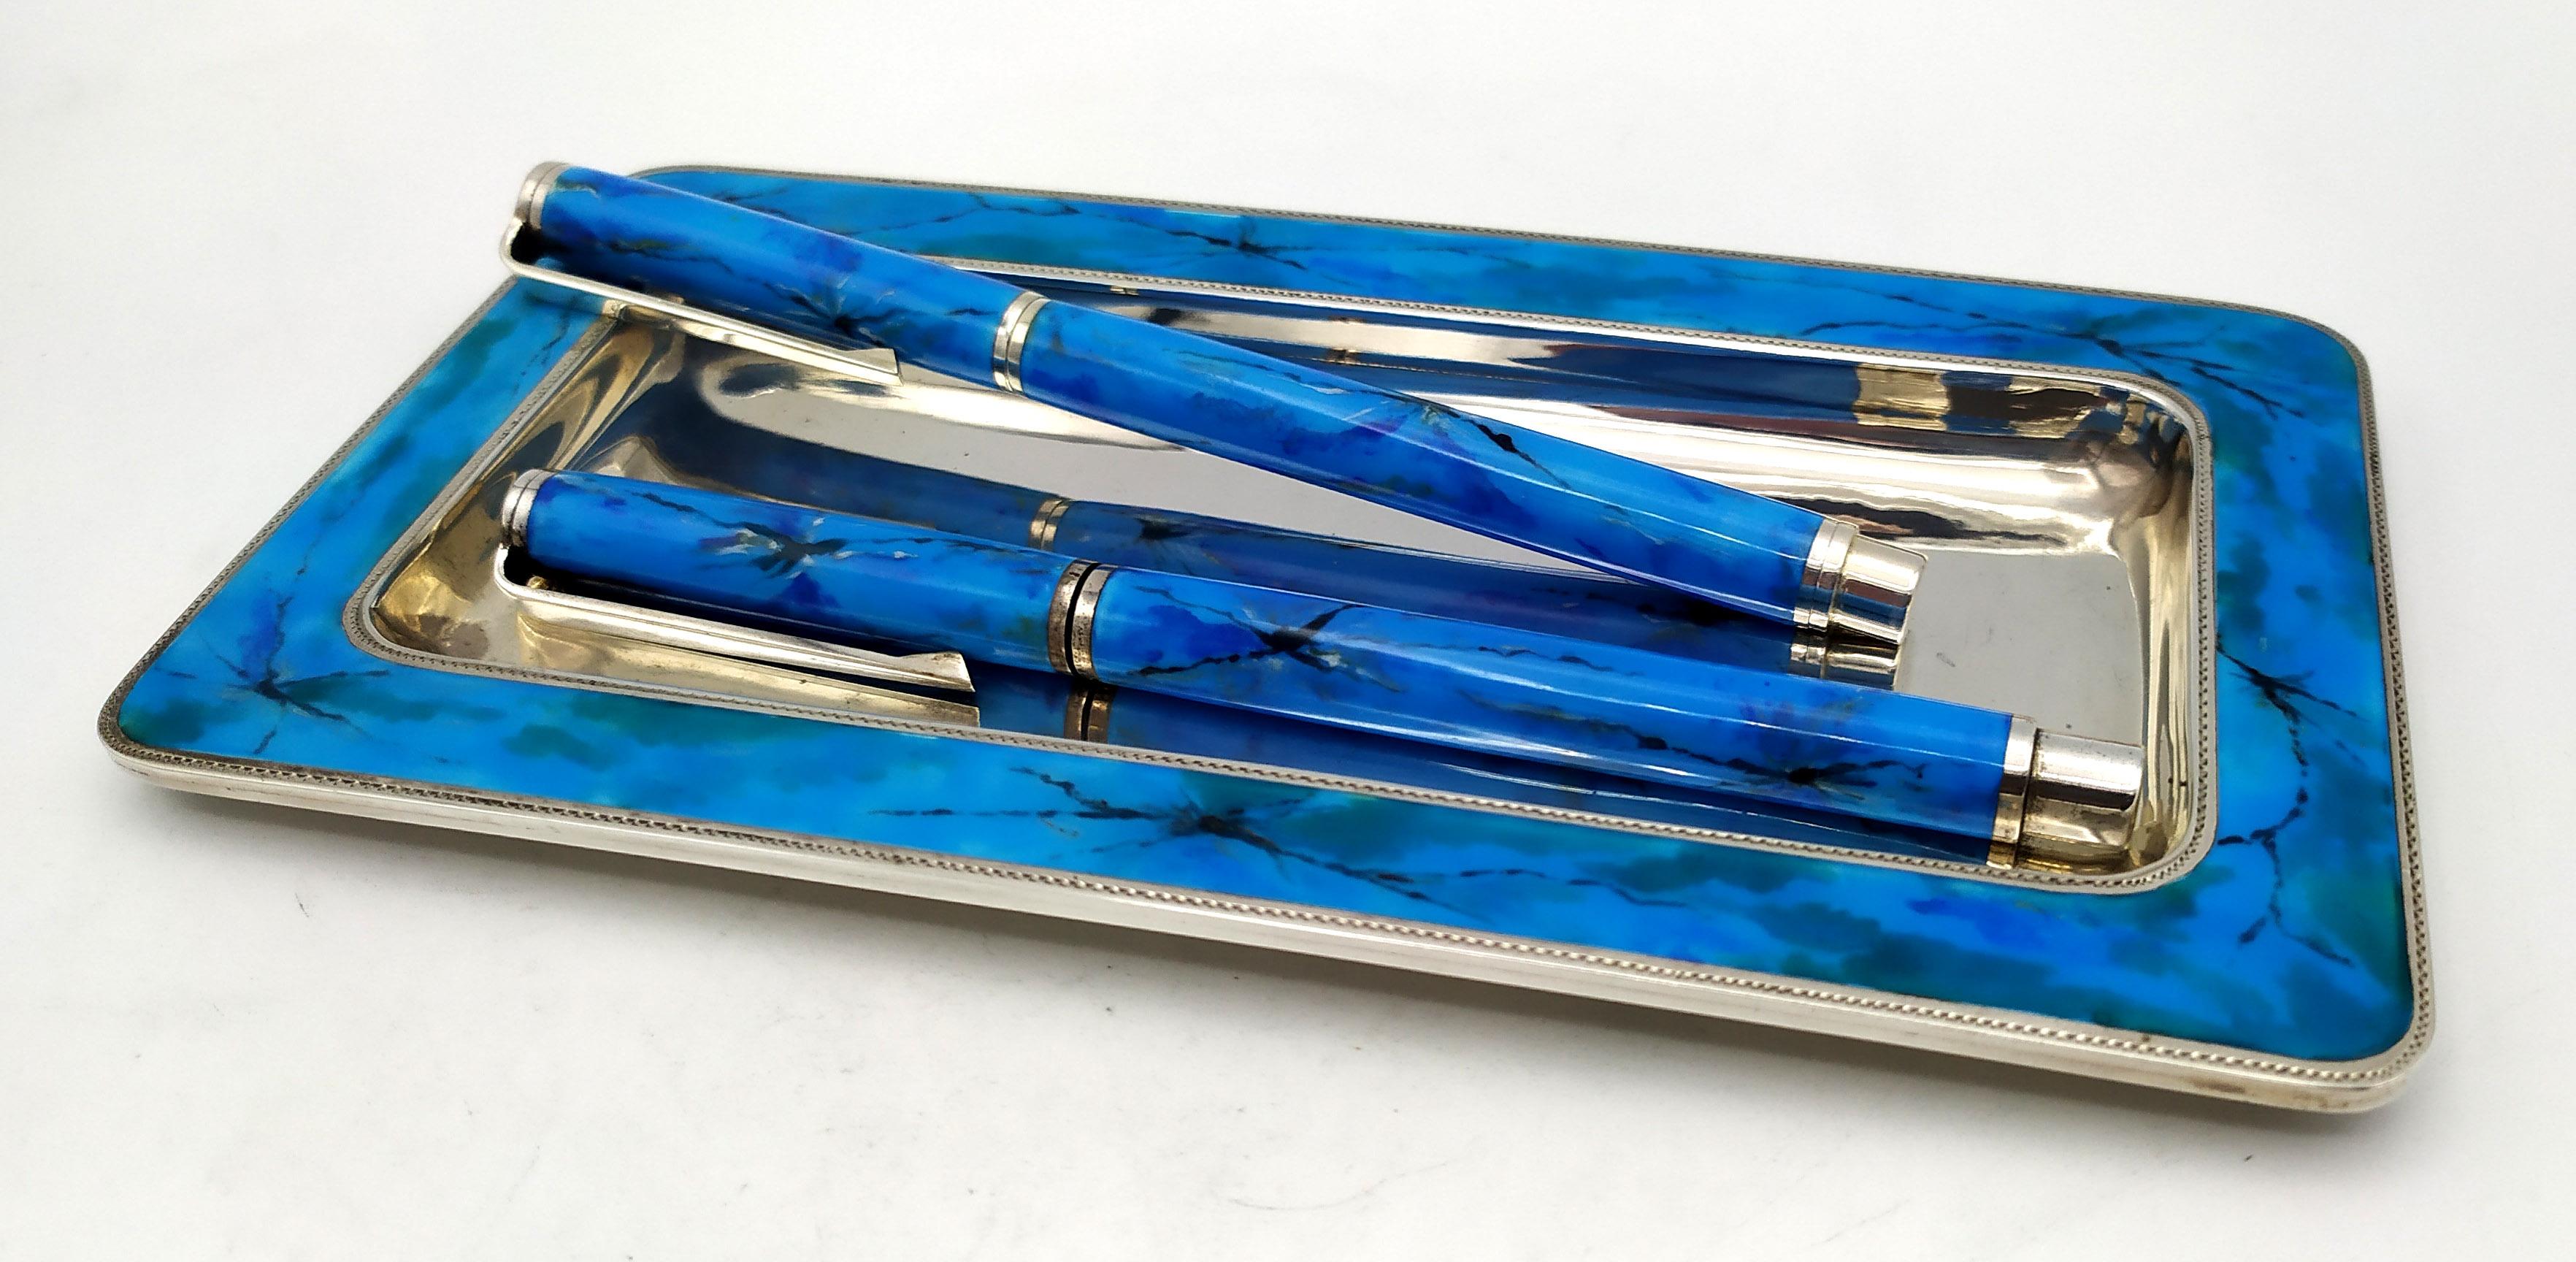 Rectangular tray with rounded corners in 925/1000 sterling silver with hand-painted fired enamel like turquoise stone, cm. 9.5 x 18. For fountain pen (4577-5210) with 18 carat gold nib and ink cartridge and for ballpoint pen (4563-5193) with